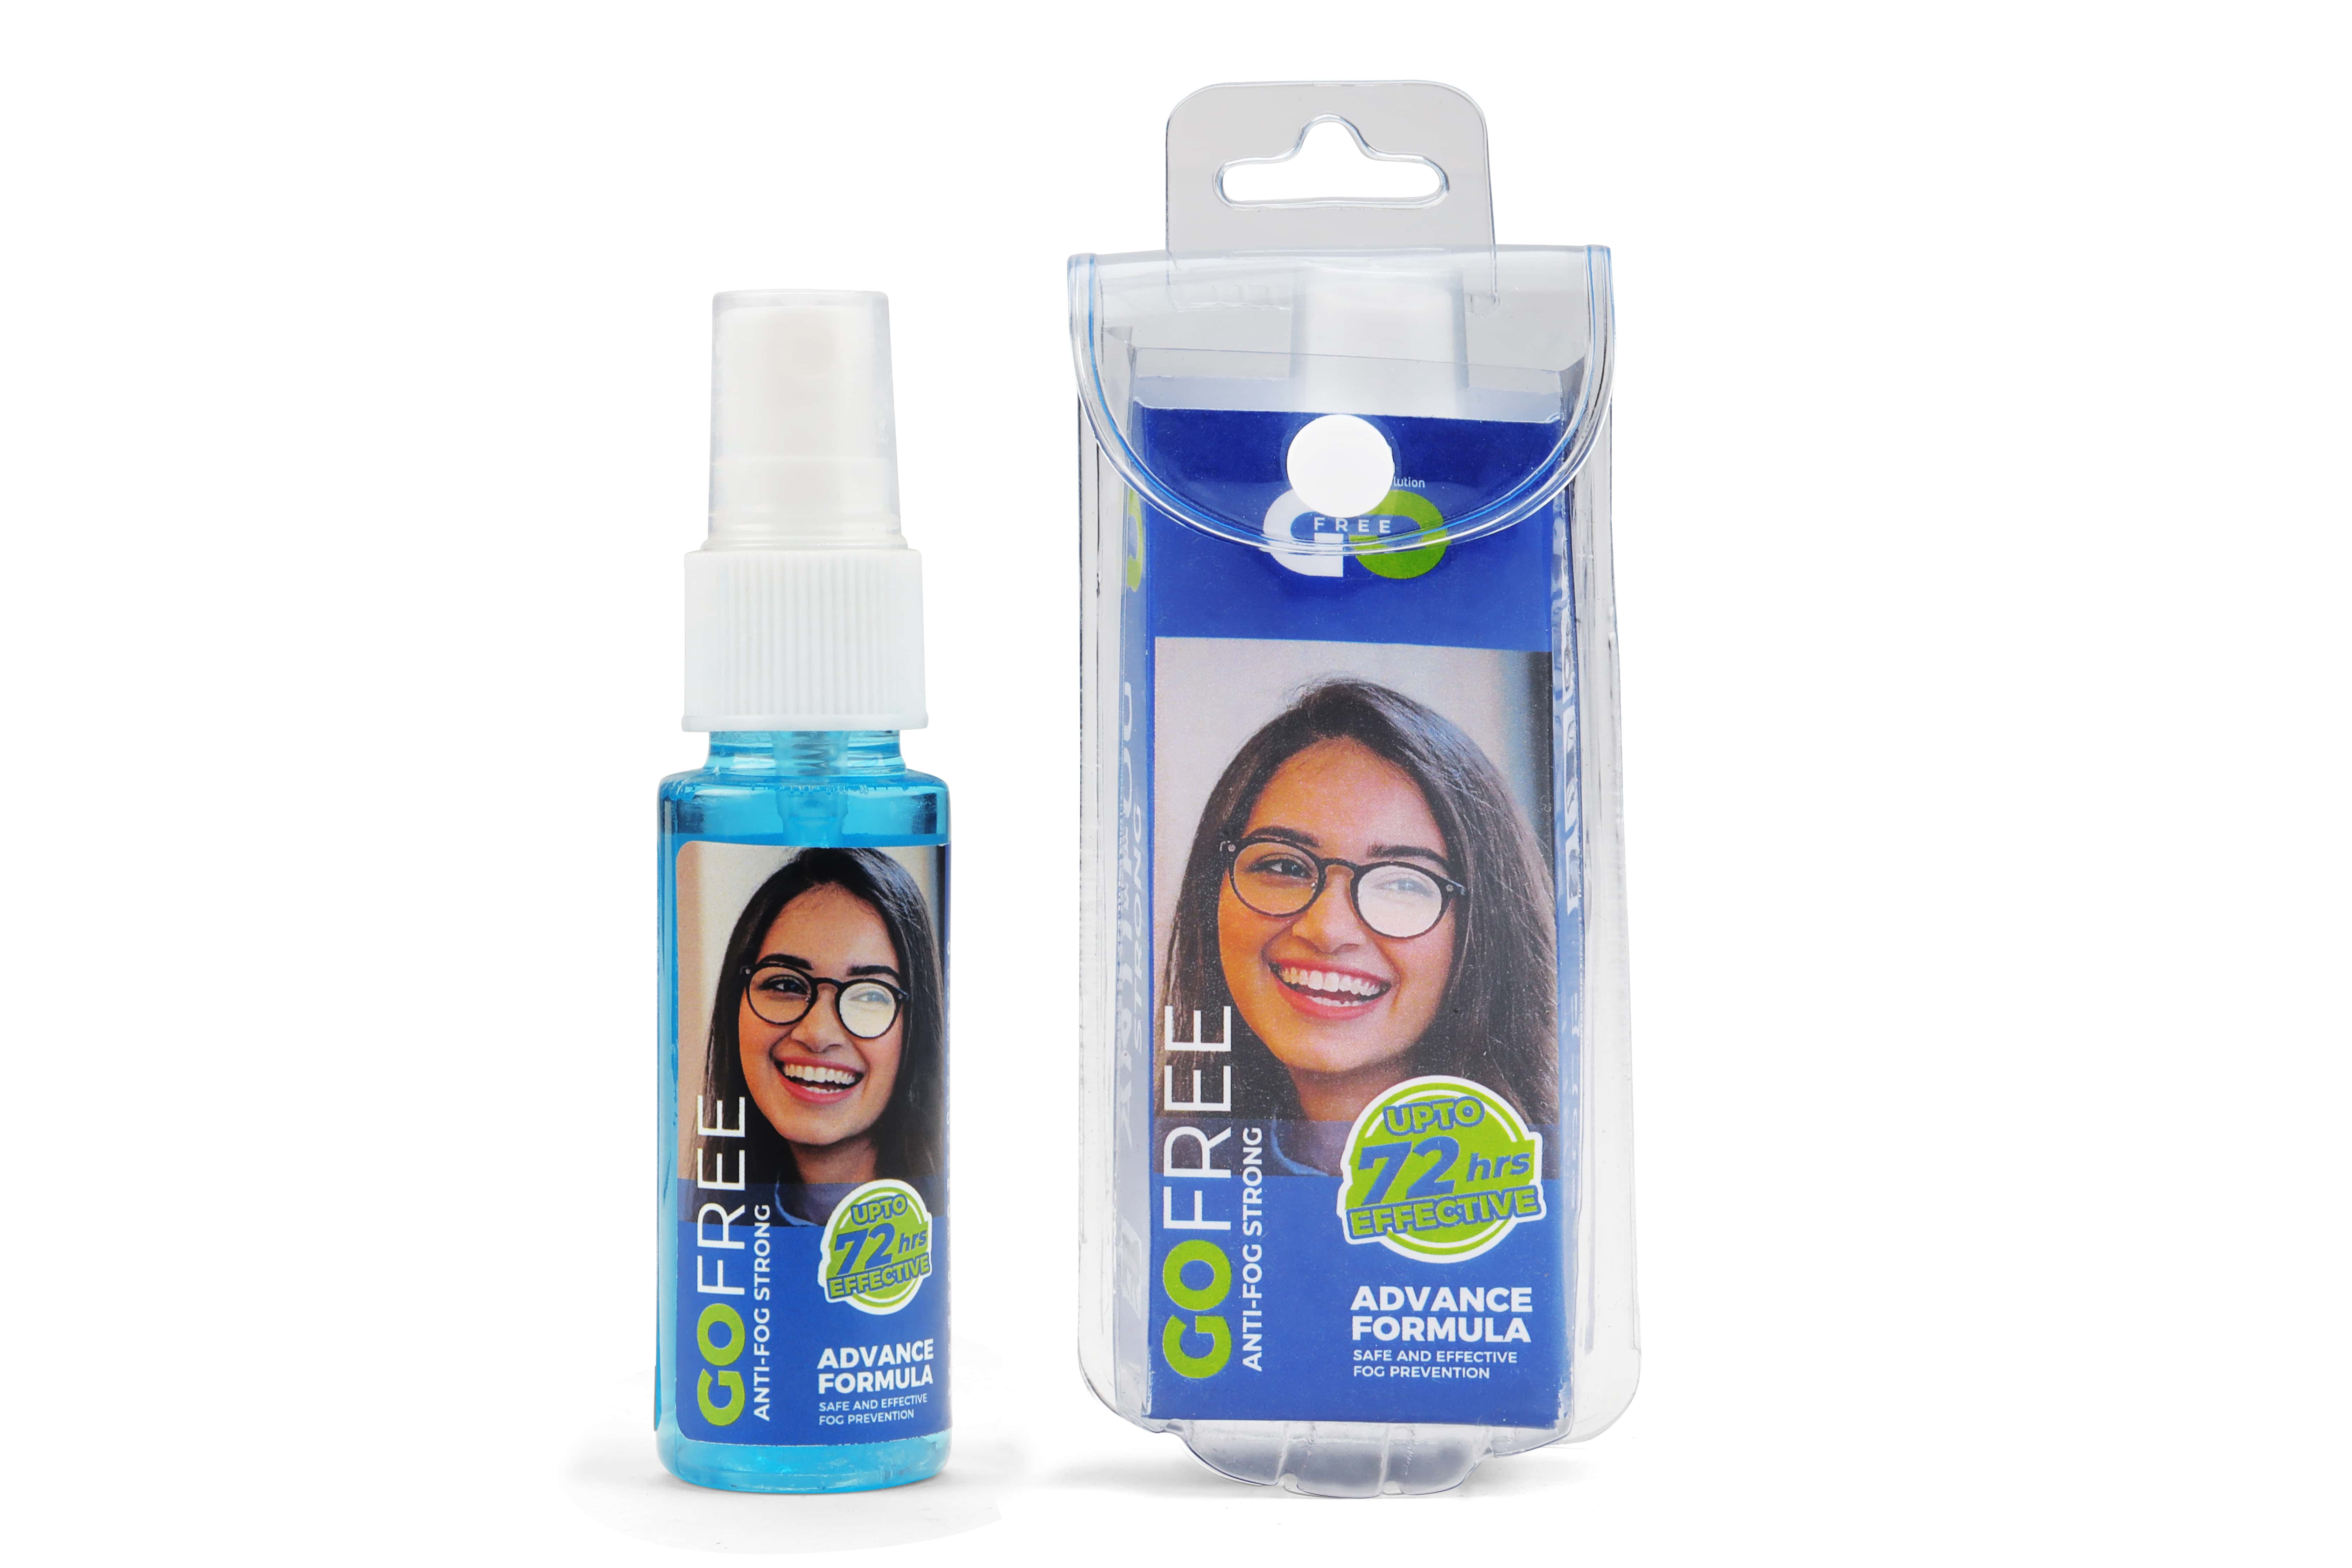 Anti-Fog Solution Strong (30 ML) - Effective for up to 72 Hrs. Ideal for Spectacles, Sunglasses & Eyewear